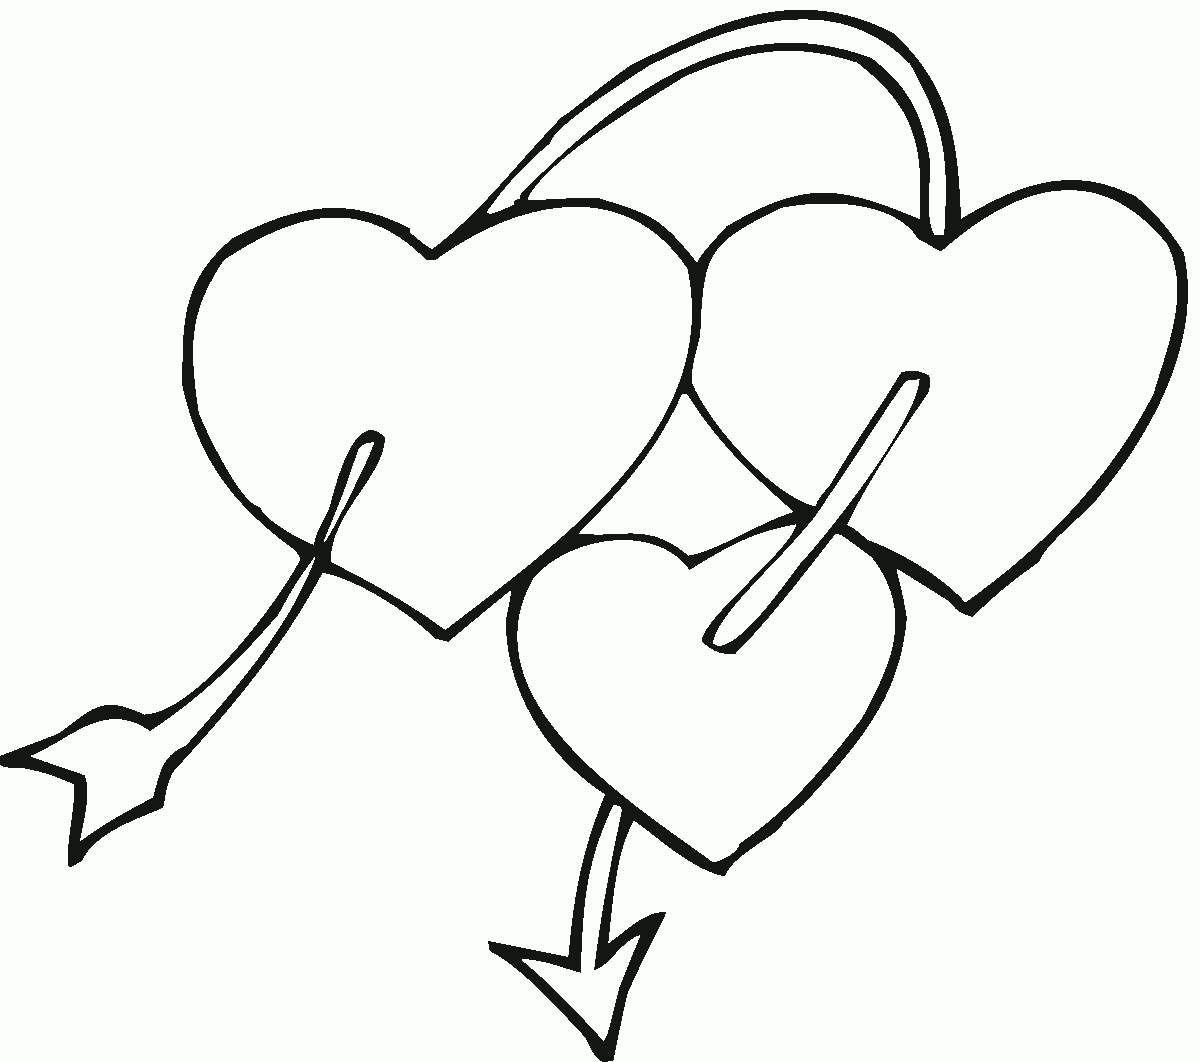 Hearts Coloring Pages hearts_cl_02 Printable 2021 3244 Coloring4free